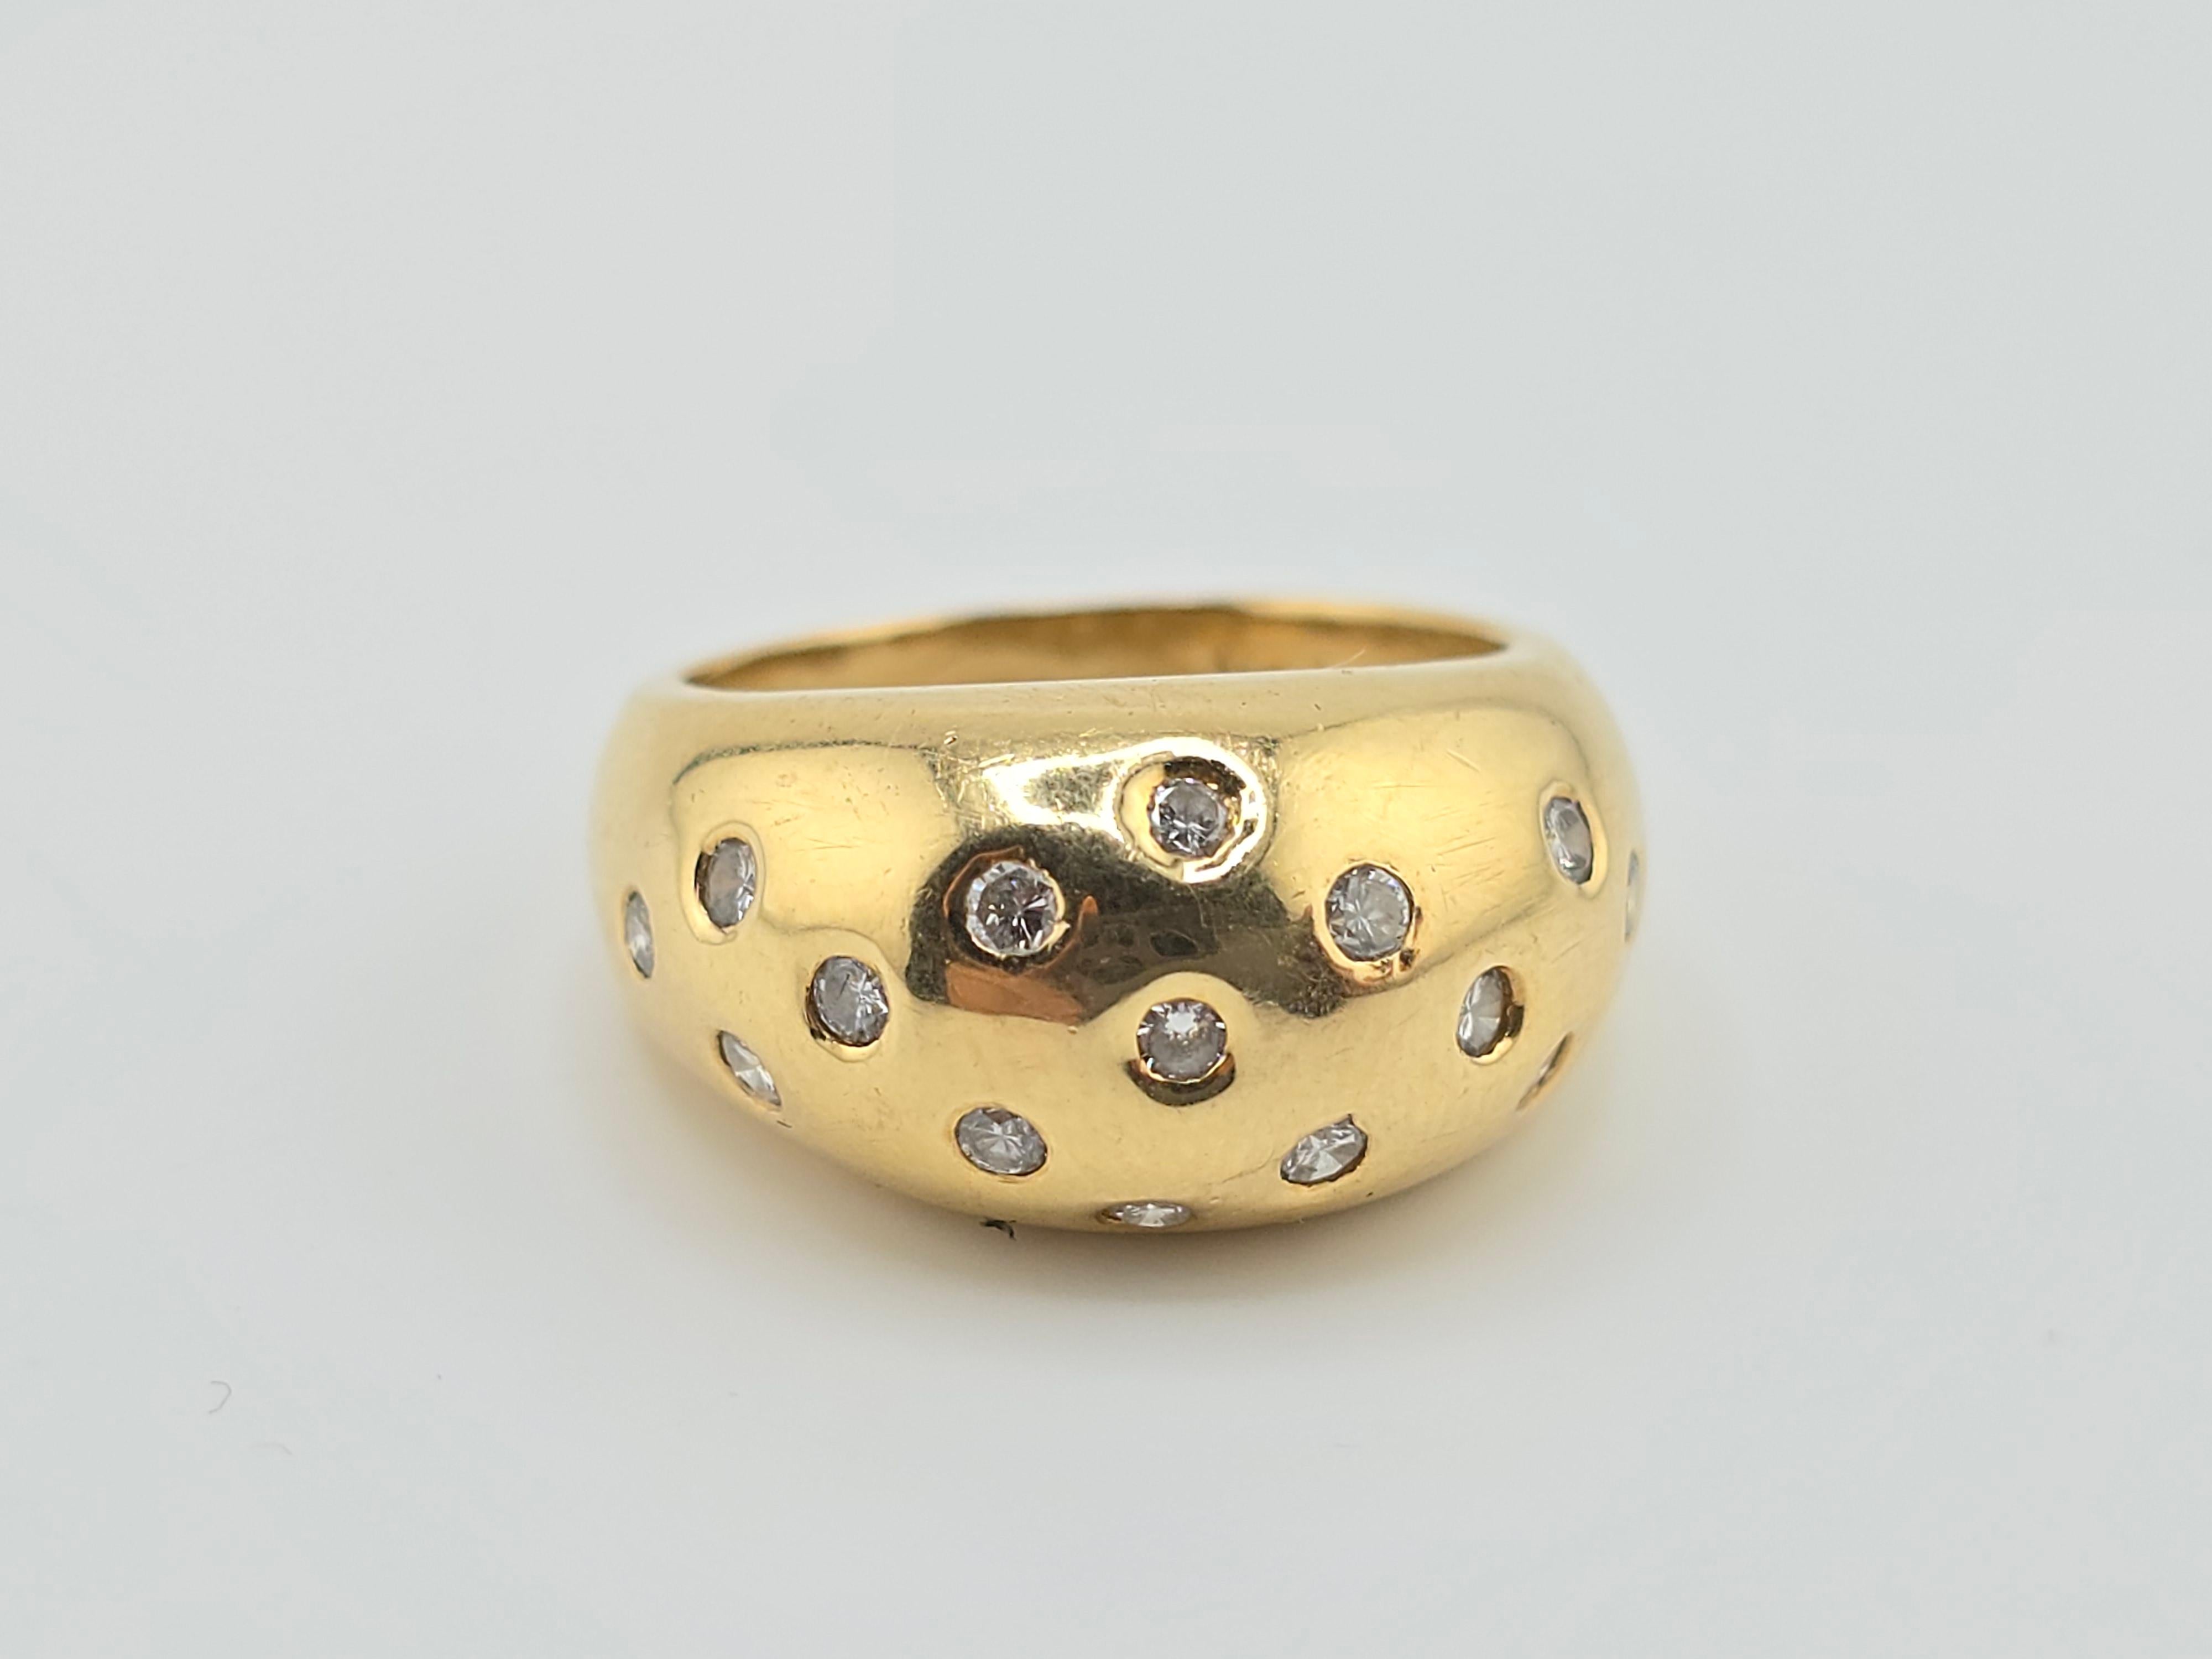 This is a very heavy gorgeous diamond and 18 karat yellow gold ring. It has many little round diamonds all around the ring. The quality of the diamonds are very beautiful ranging from VS to SI Clarity with colors of GHI. The weight of the ring is